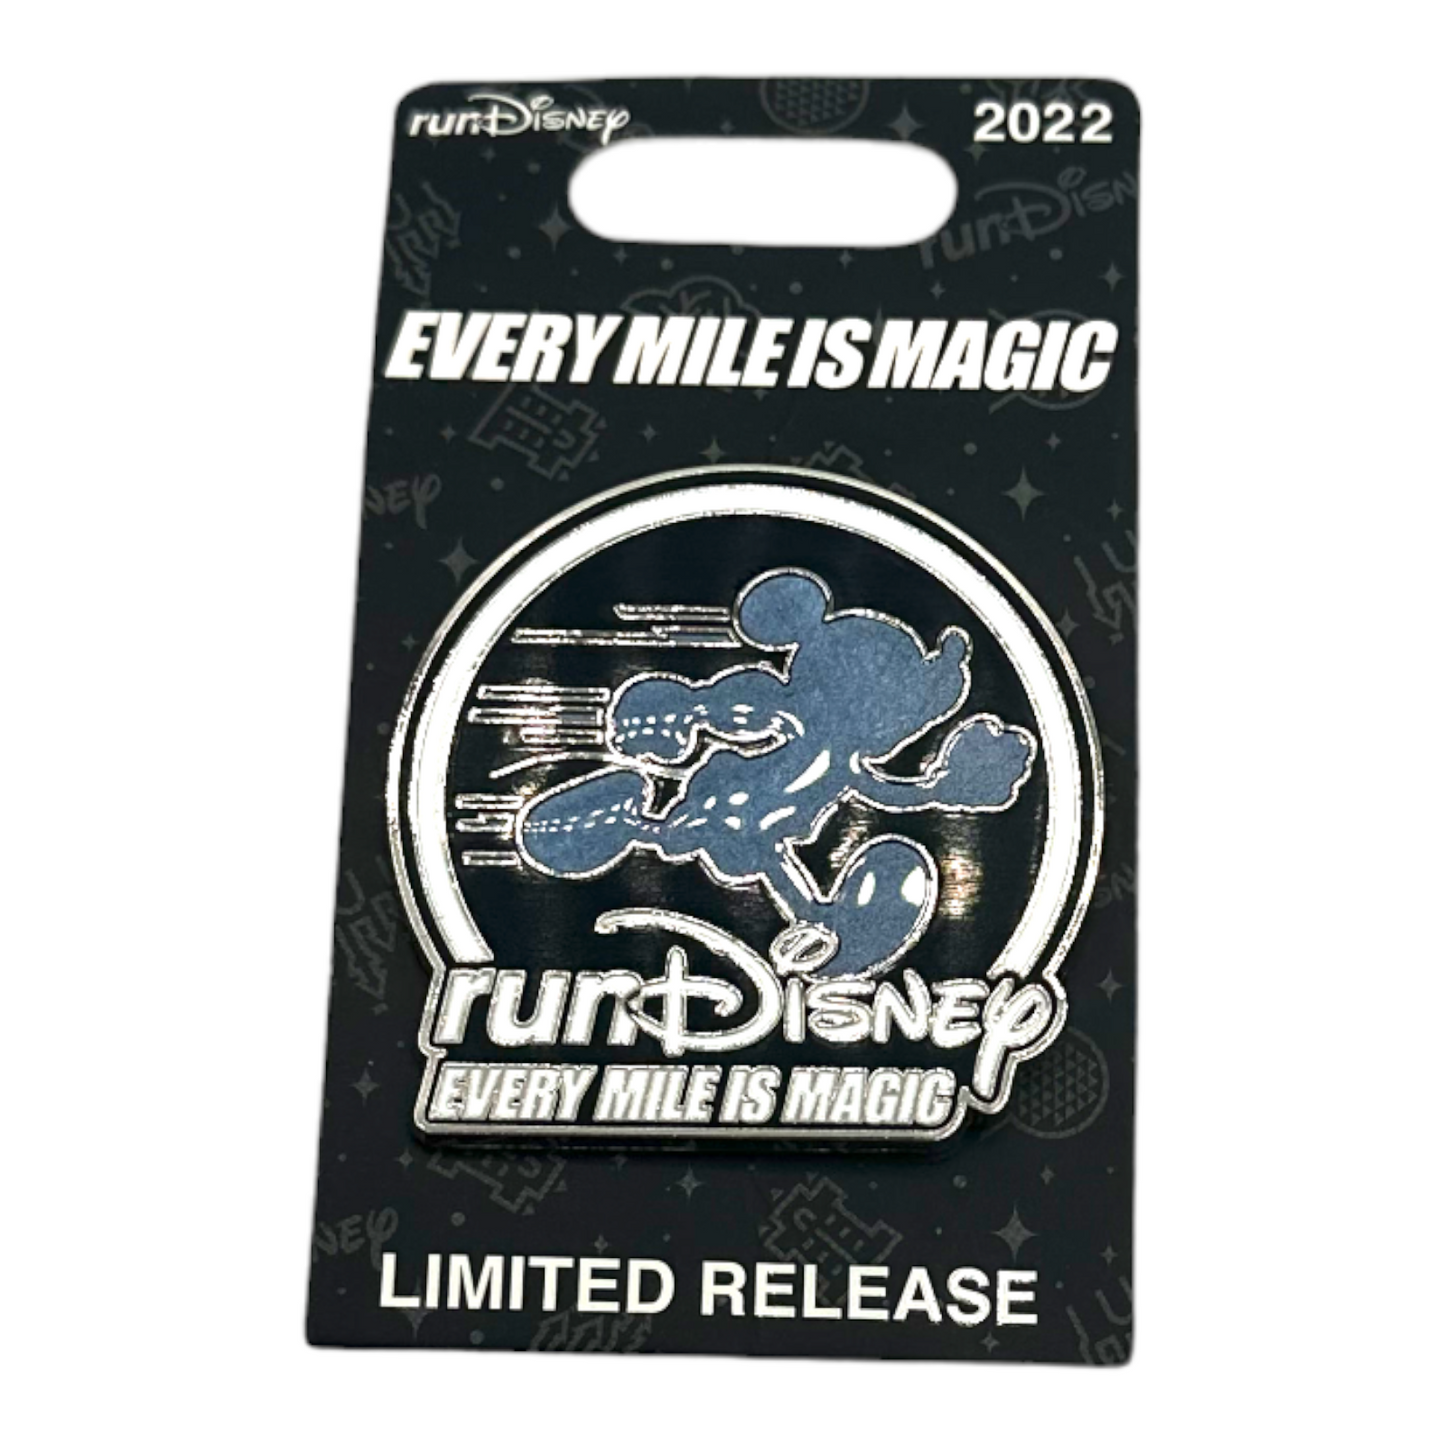 Every Mile Is Magic Run Disney 2022 - Limited Release